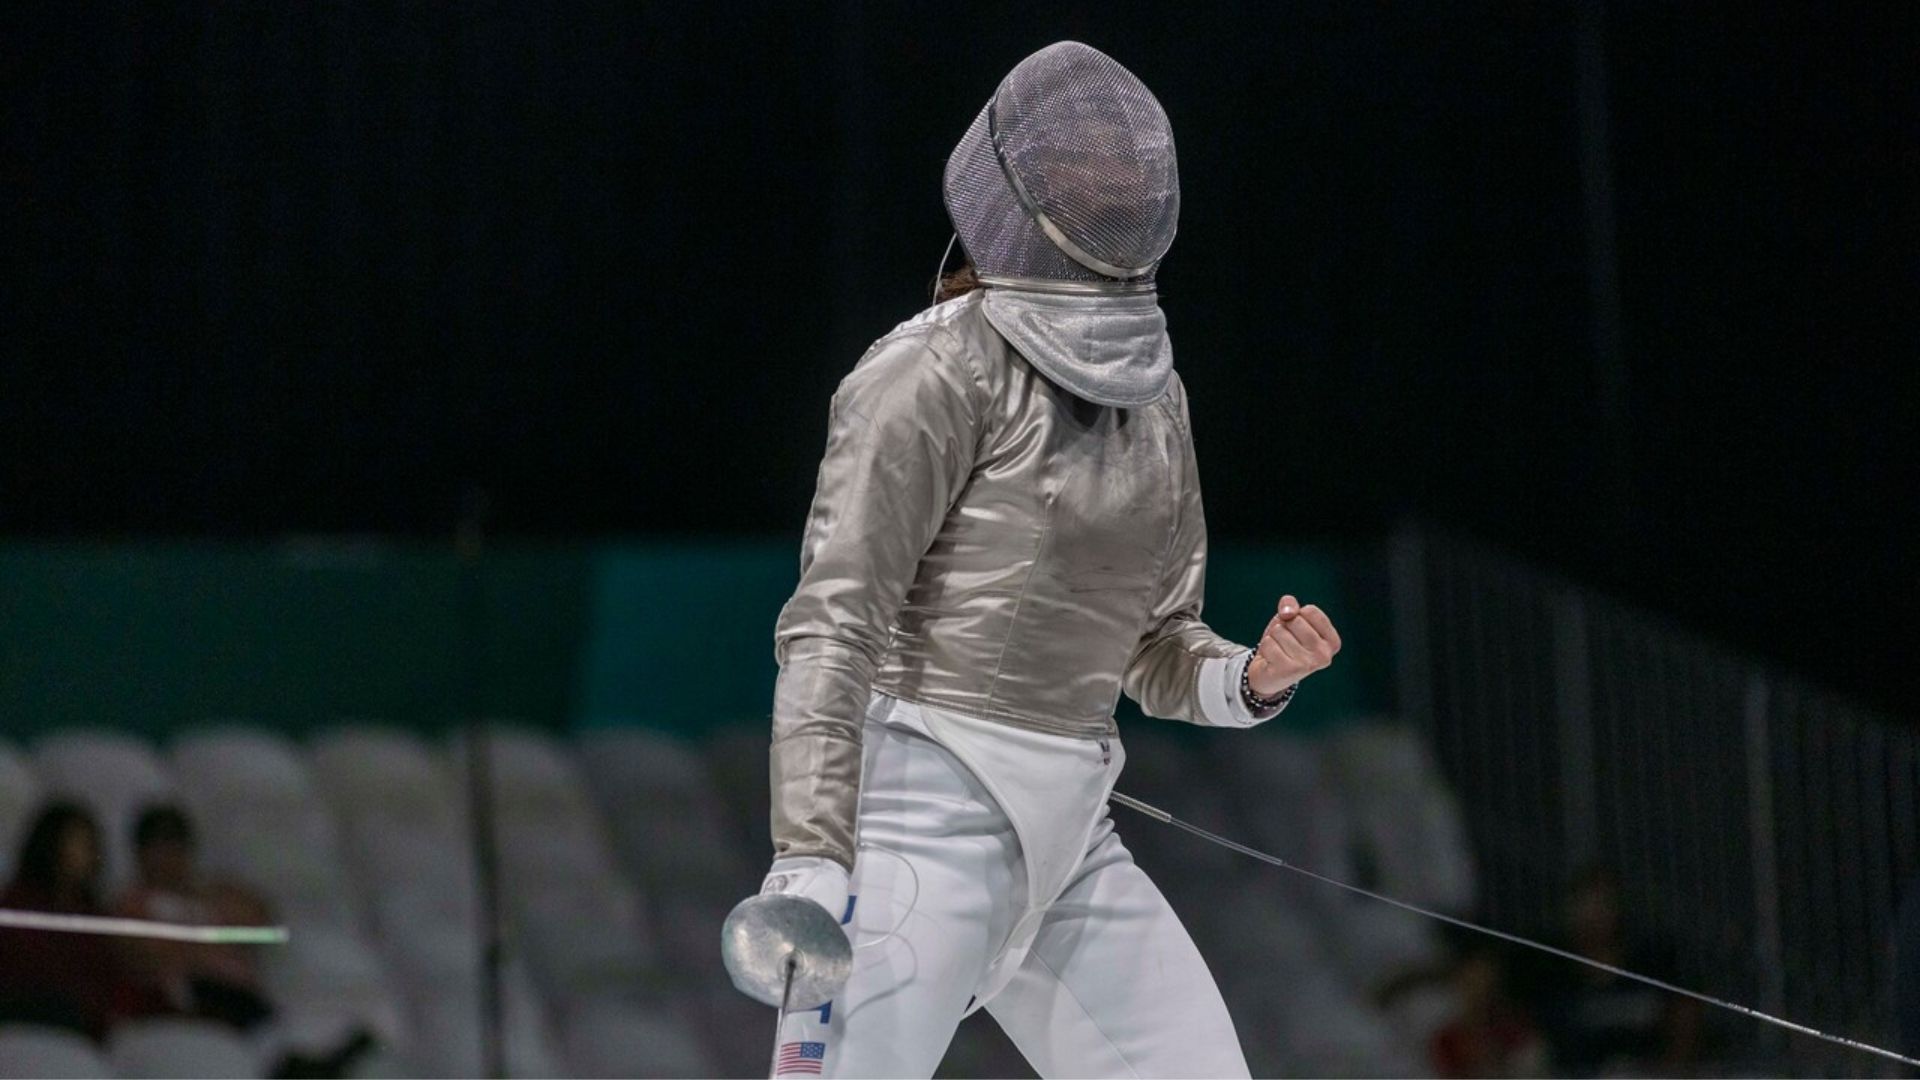 The United States celebrates two new gold medals thanks to fencing